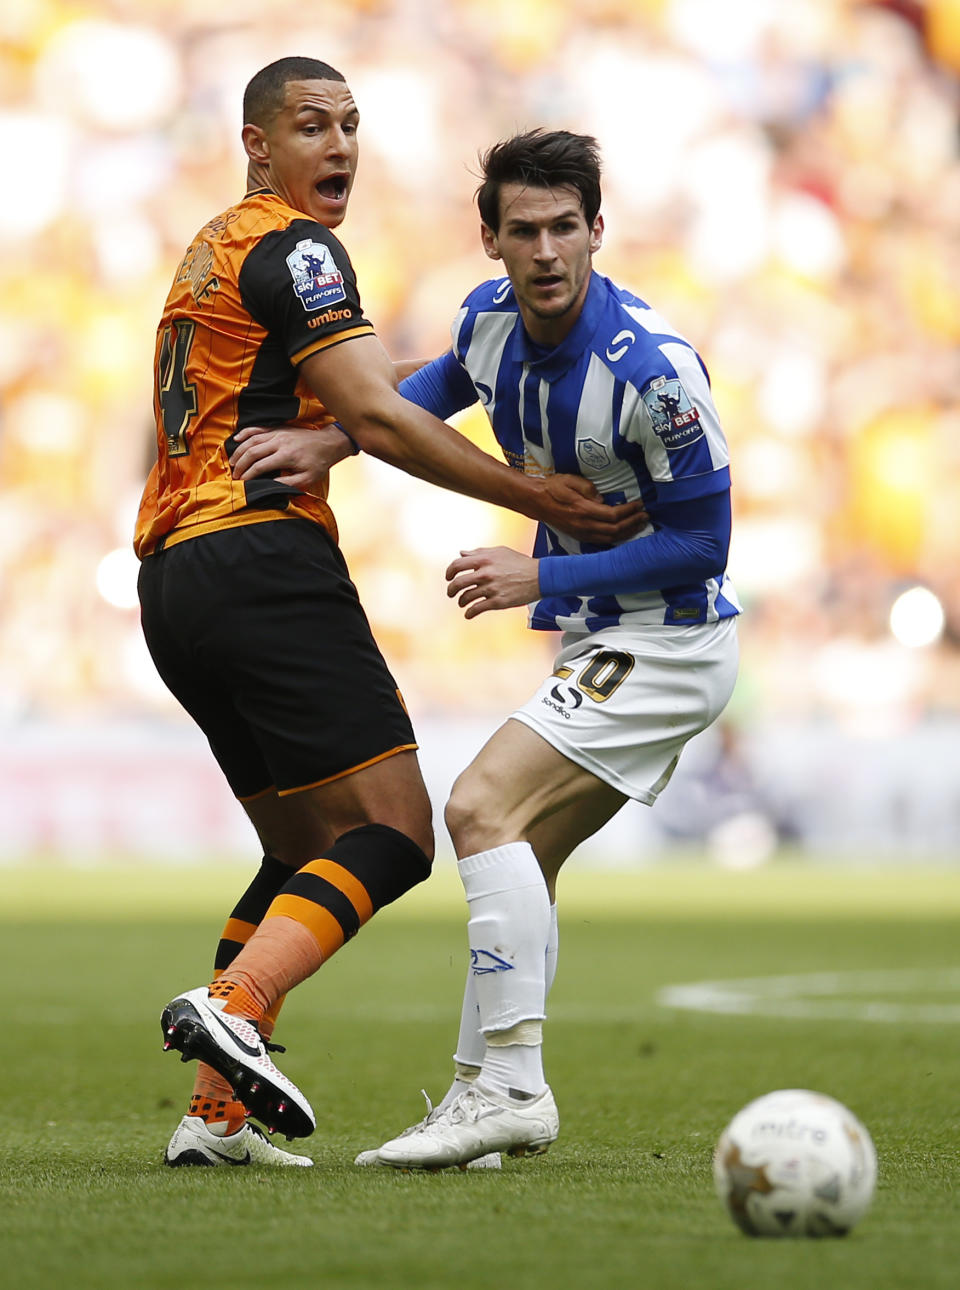 Britain Soccer Football - Hull City v Sheffield Wednesday - Sky Bet Football League Championship Play-Off Final - Wembley Stadium - 28/5/16 Hull City's Jake Livermore in action with Sheffield Wednesday's Kieran Lee Action Images via Reuters / Andrew Couldridge Livepic EDITORIAL USE ONLY. No use with unauthorized audio, video, data, fixture lists, club/league logos or "live" services. Online in-match use limited to 45 images, no video emulation. No use in betting, games or single club/league/player publications. Please contact your account representative for further details.